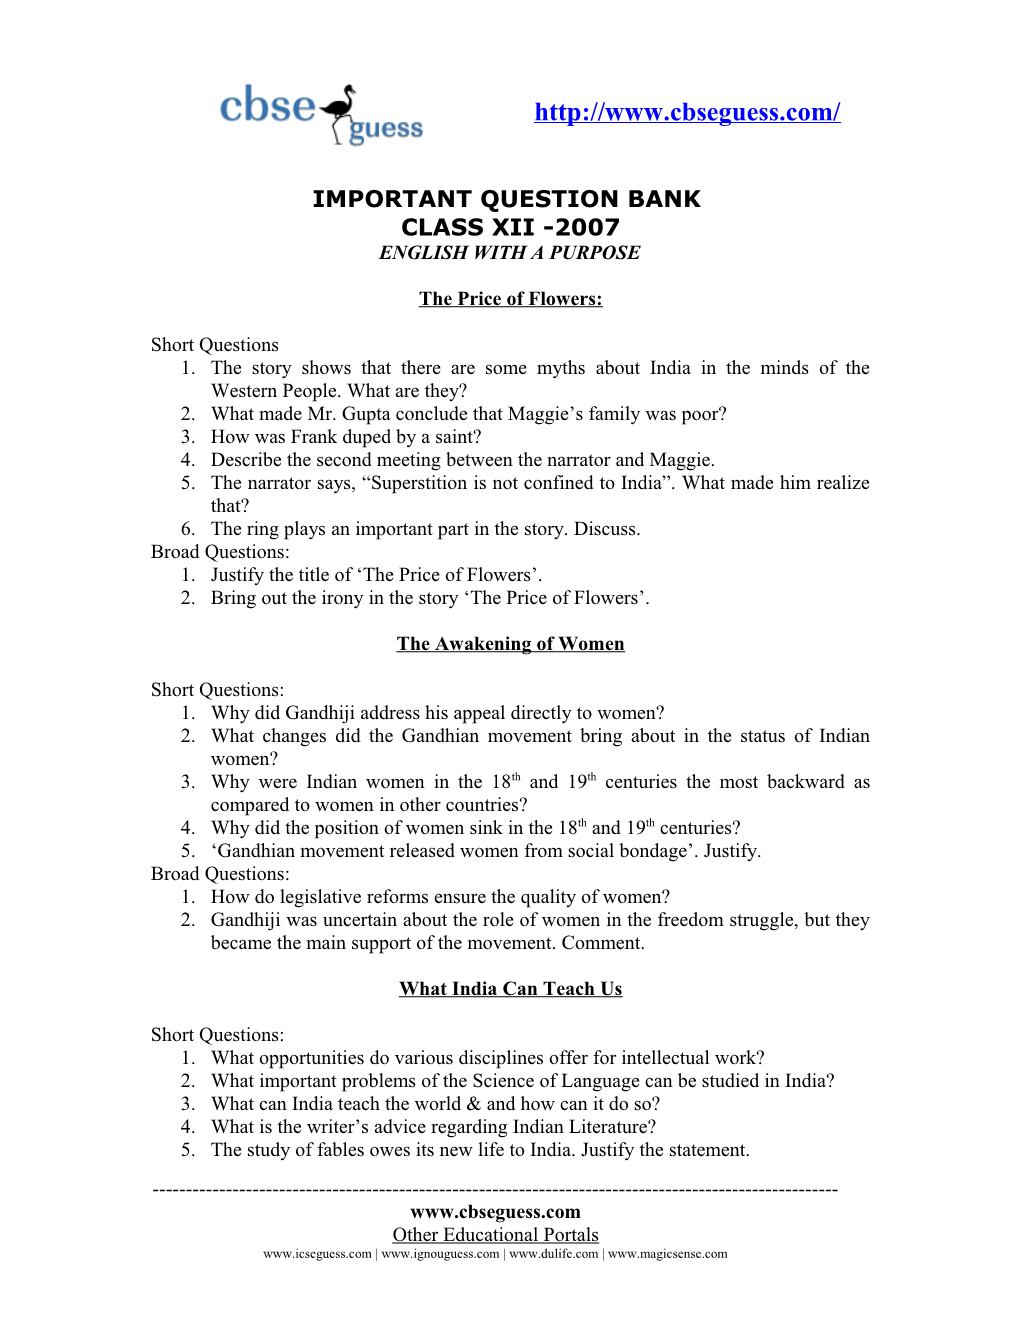 Important Question Bank for Class Xii -2007